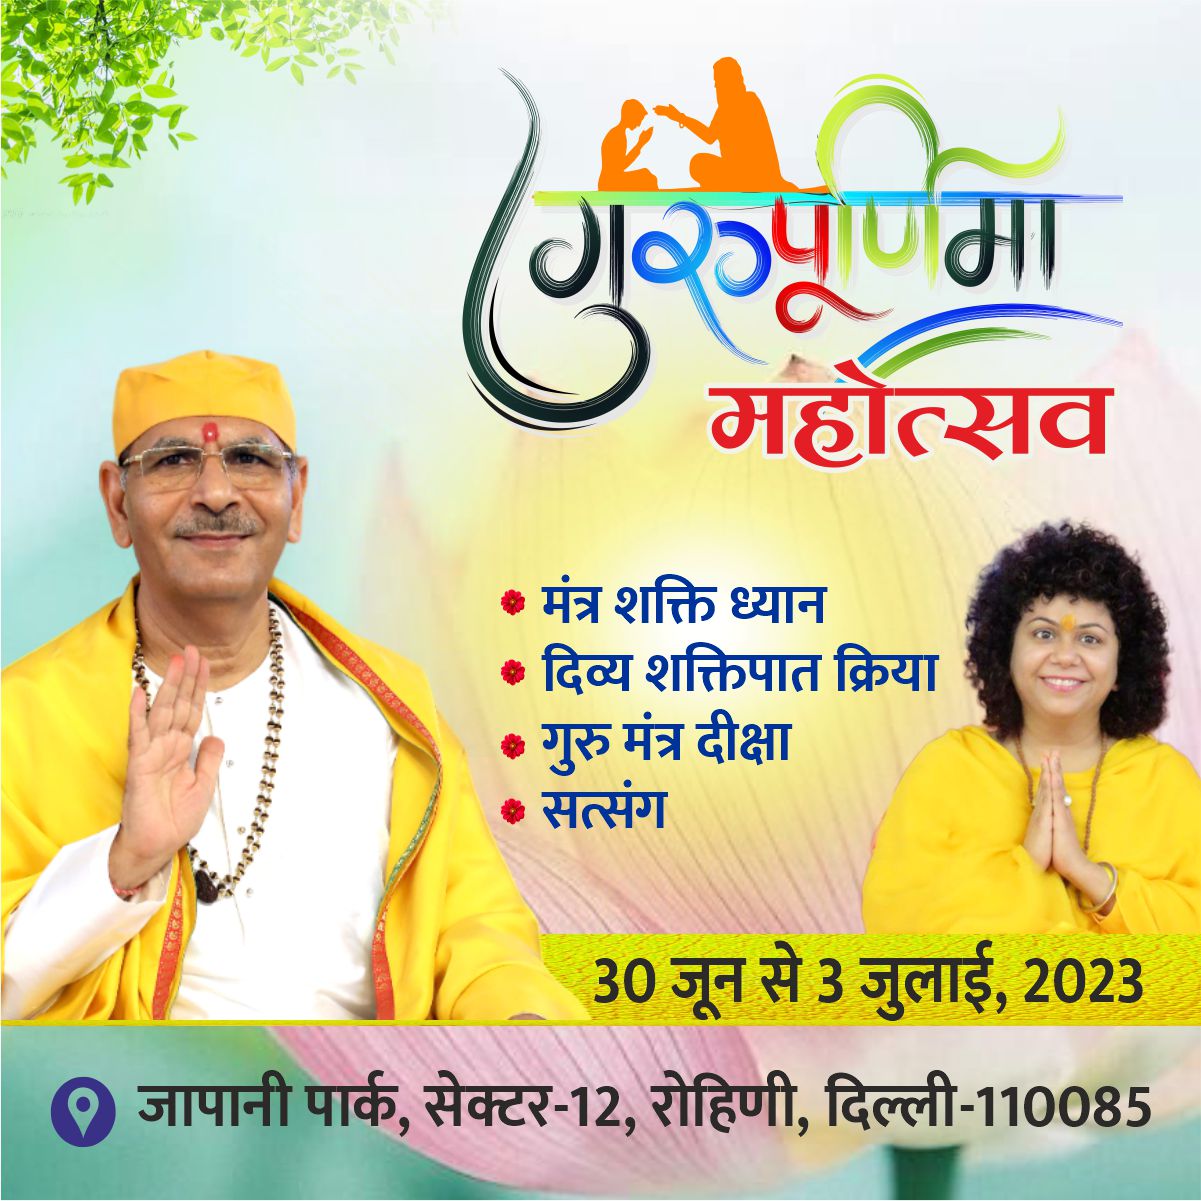 Guru Purnima 2023 - The Day to Receive the Blessings | VJM